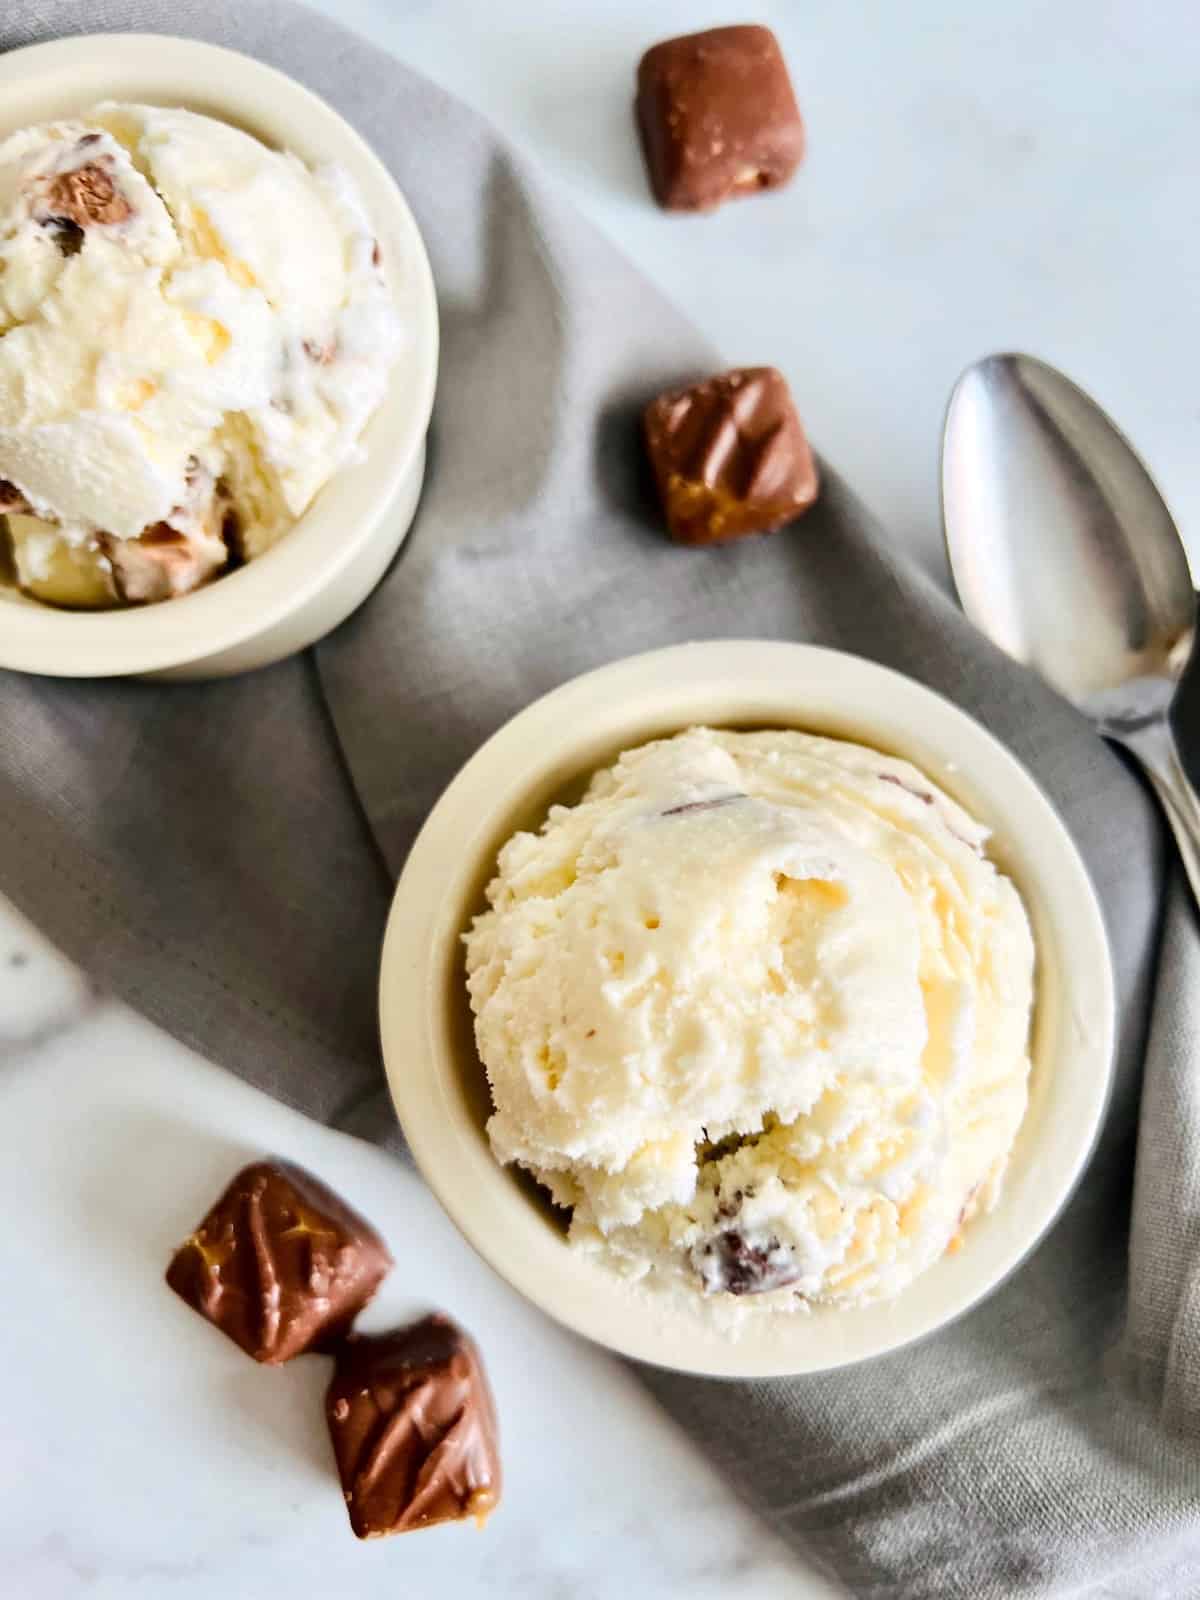 Candy Bar Ice Cream Overhead two scoops in bowls with spoon and unwrapped candies.